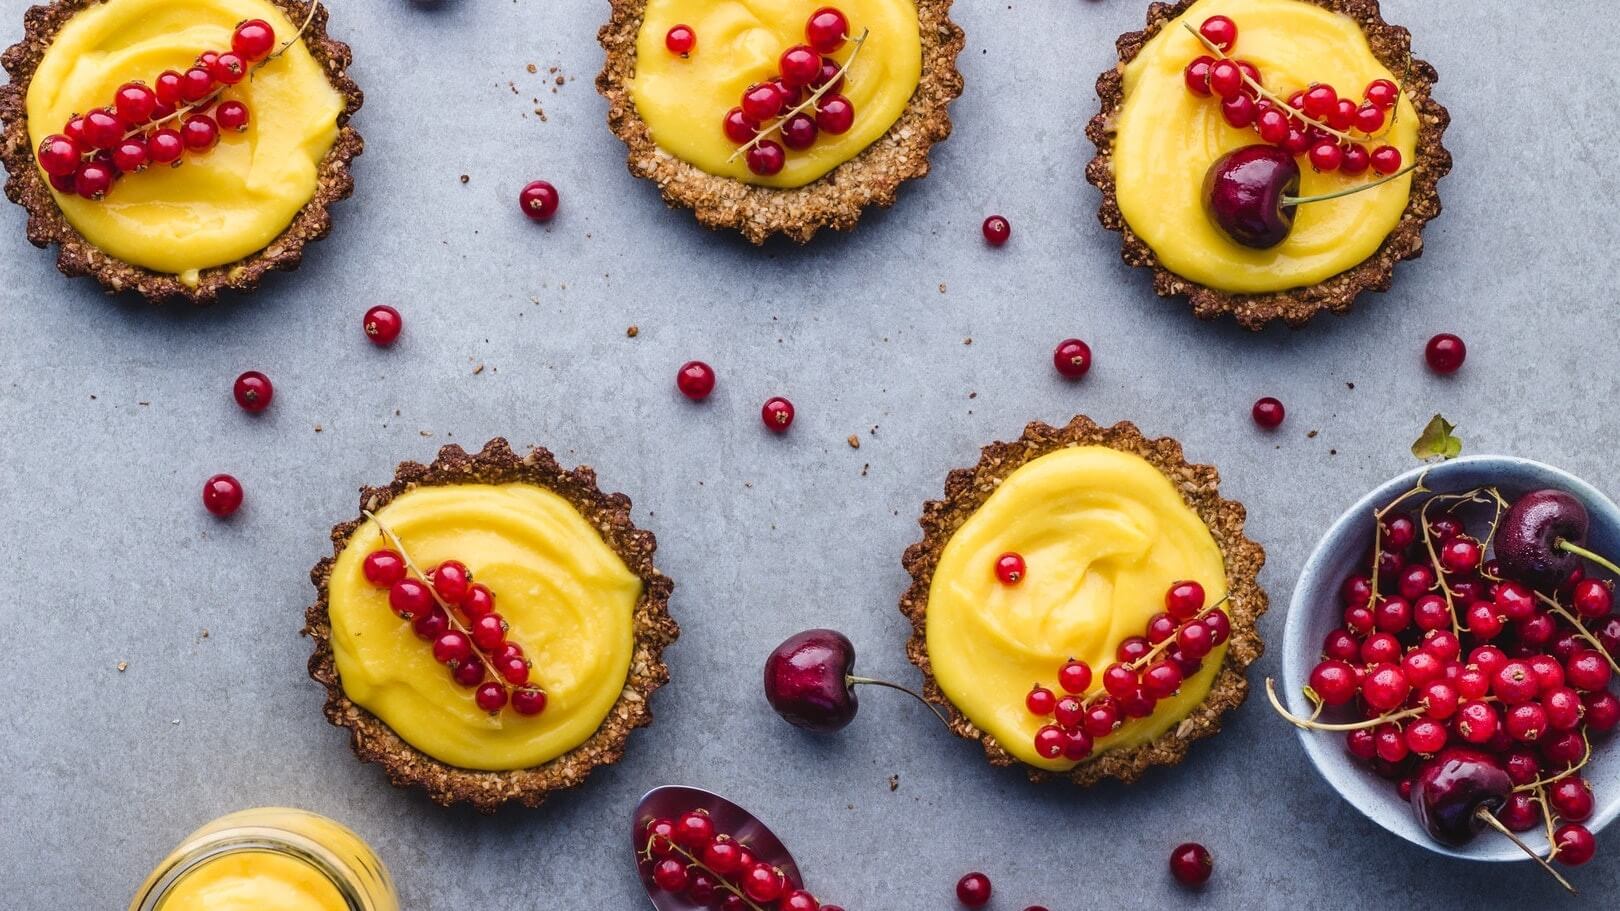 These Raw Vegan Meyer Lemon Tarts Have a Mulberry-Date Crust